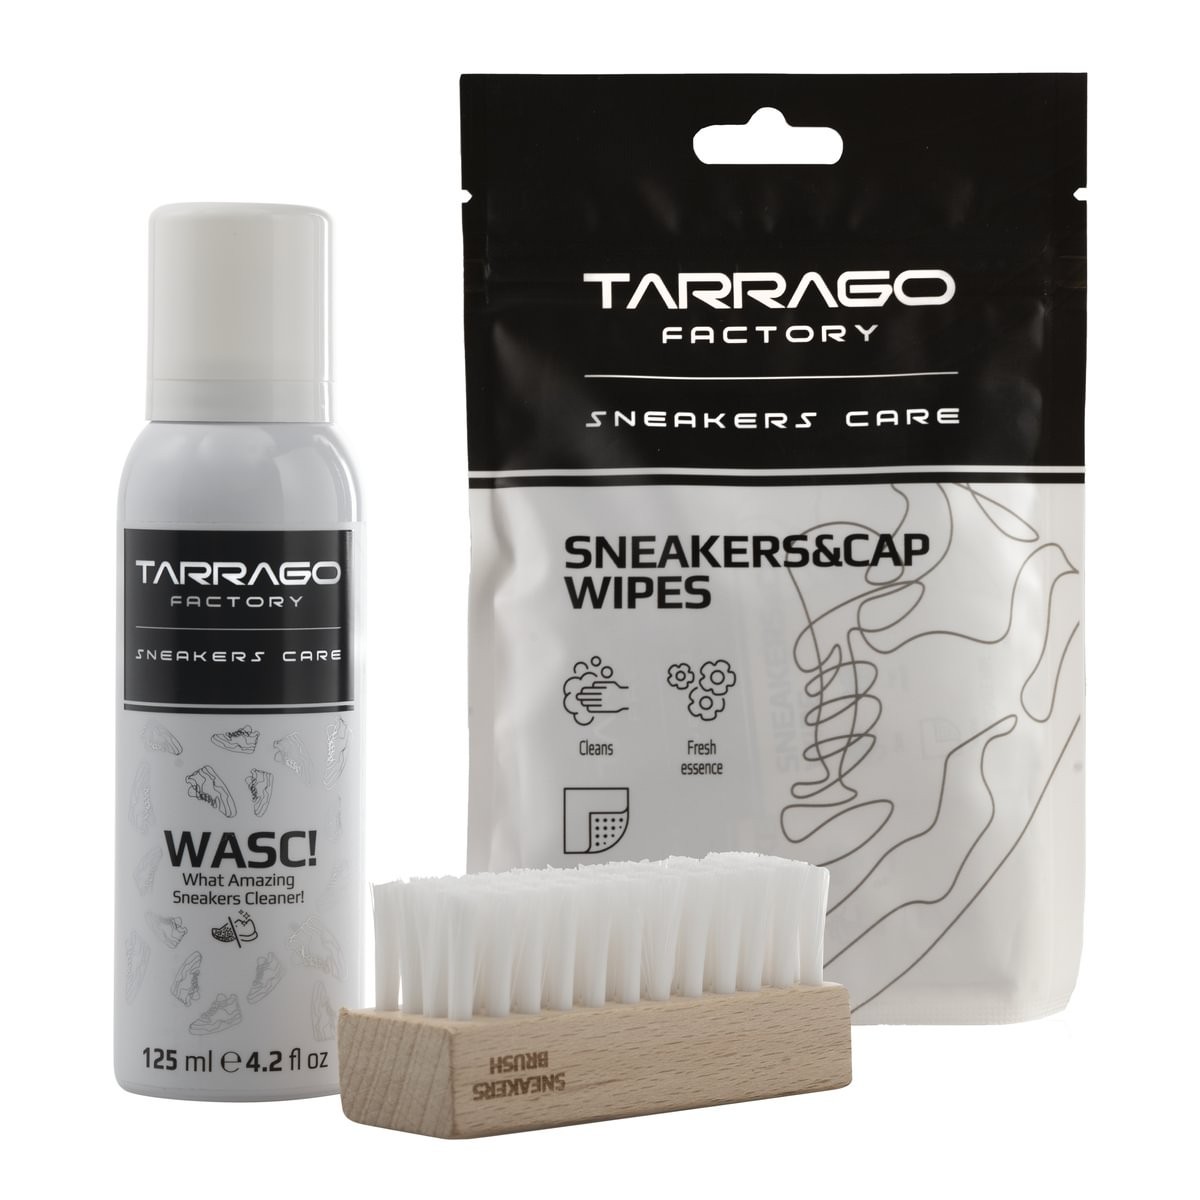 Sneaker Cleaners: Which one should I choose? - Tarrago